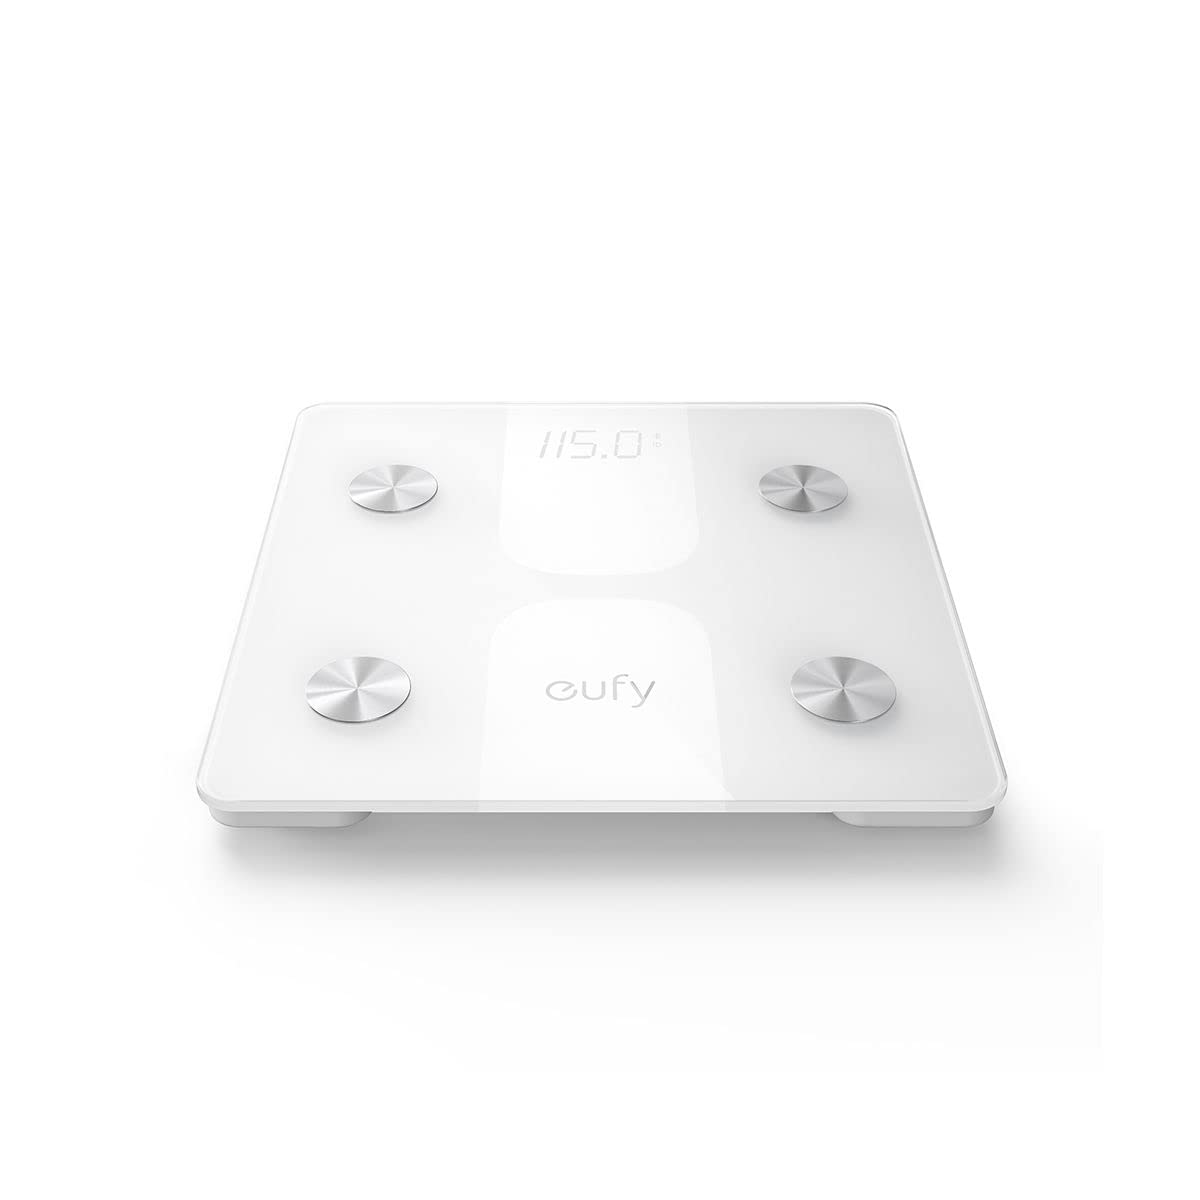 Anker Eufy Smart Scale C1 with Bluetooth, Fitness Body Composition Analysis